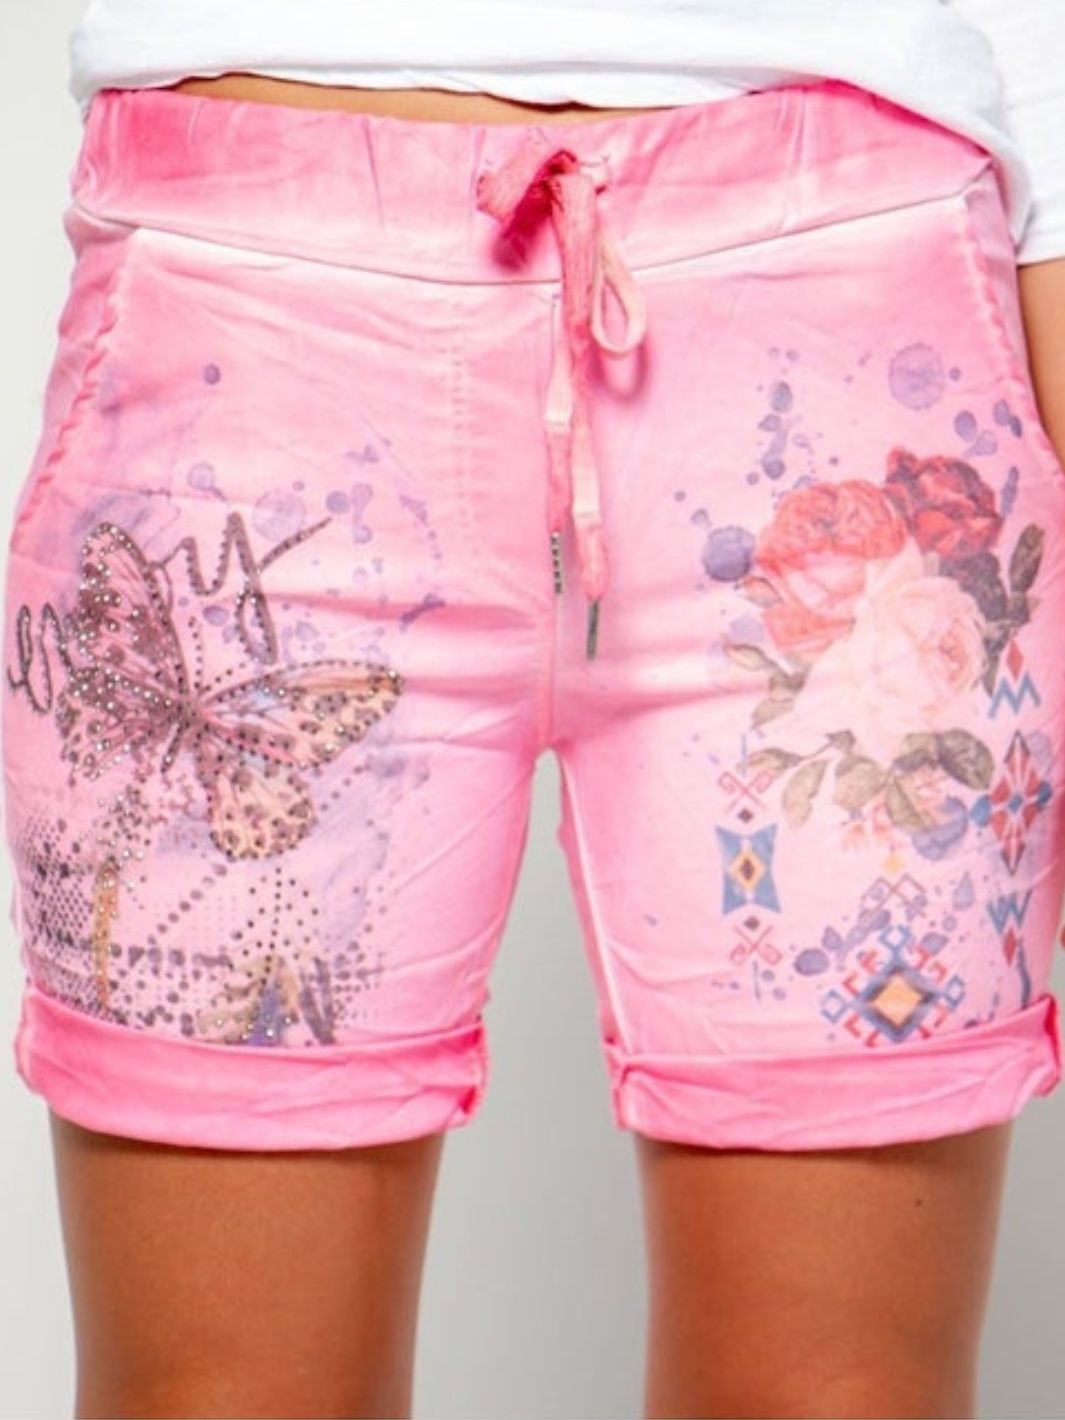 Retro Shorts With Print - Pink